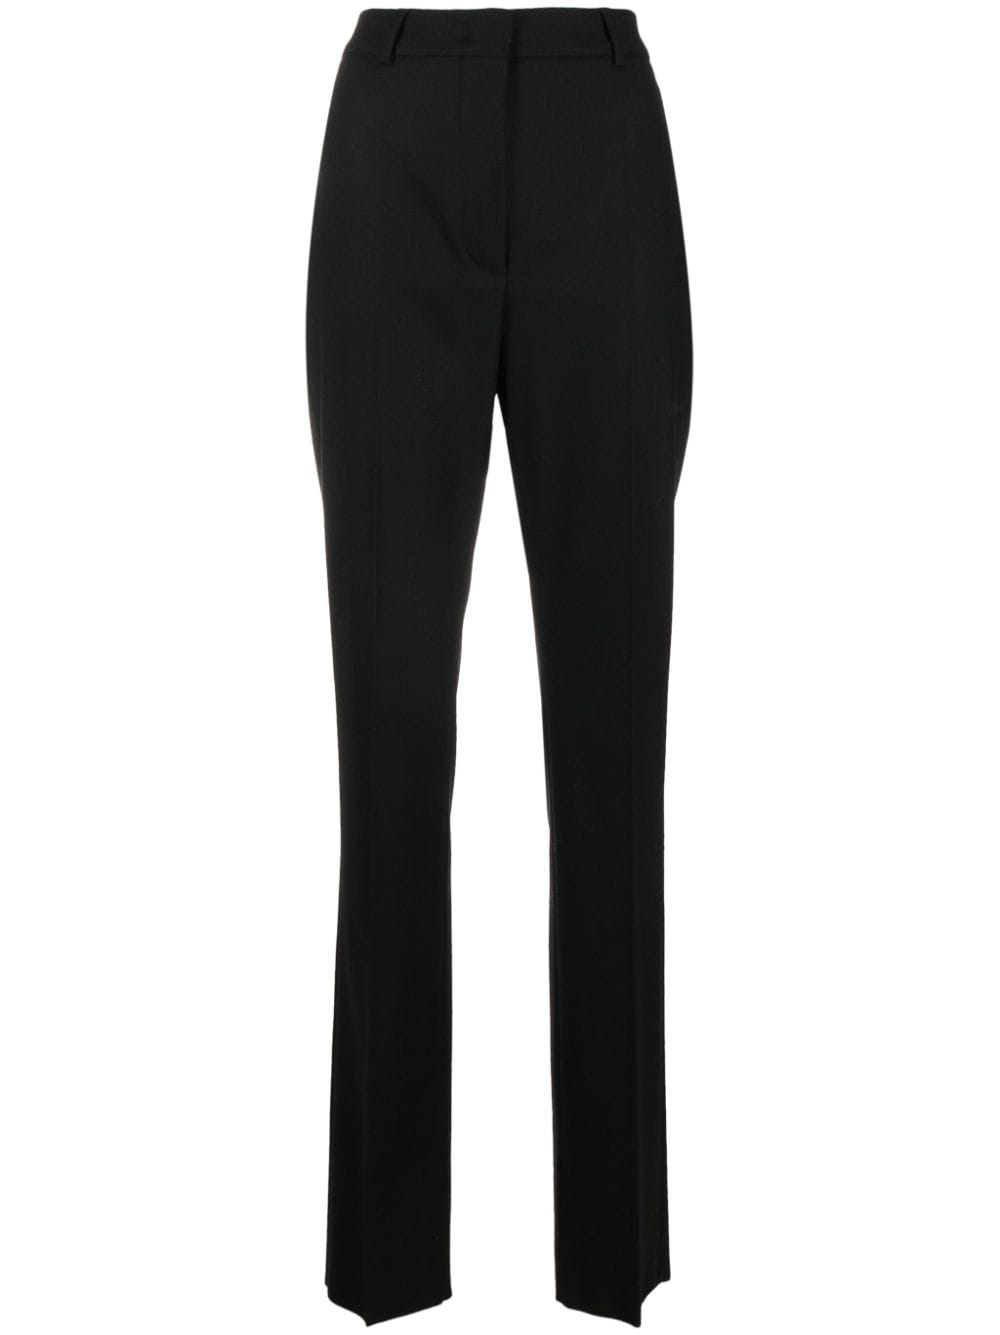 Image 1 of Sportmax flared virgin wool tailored trousers